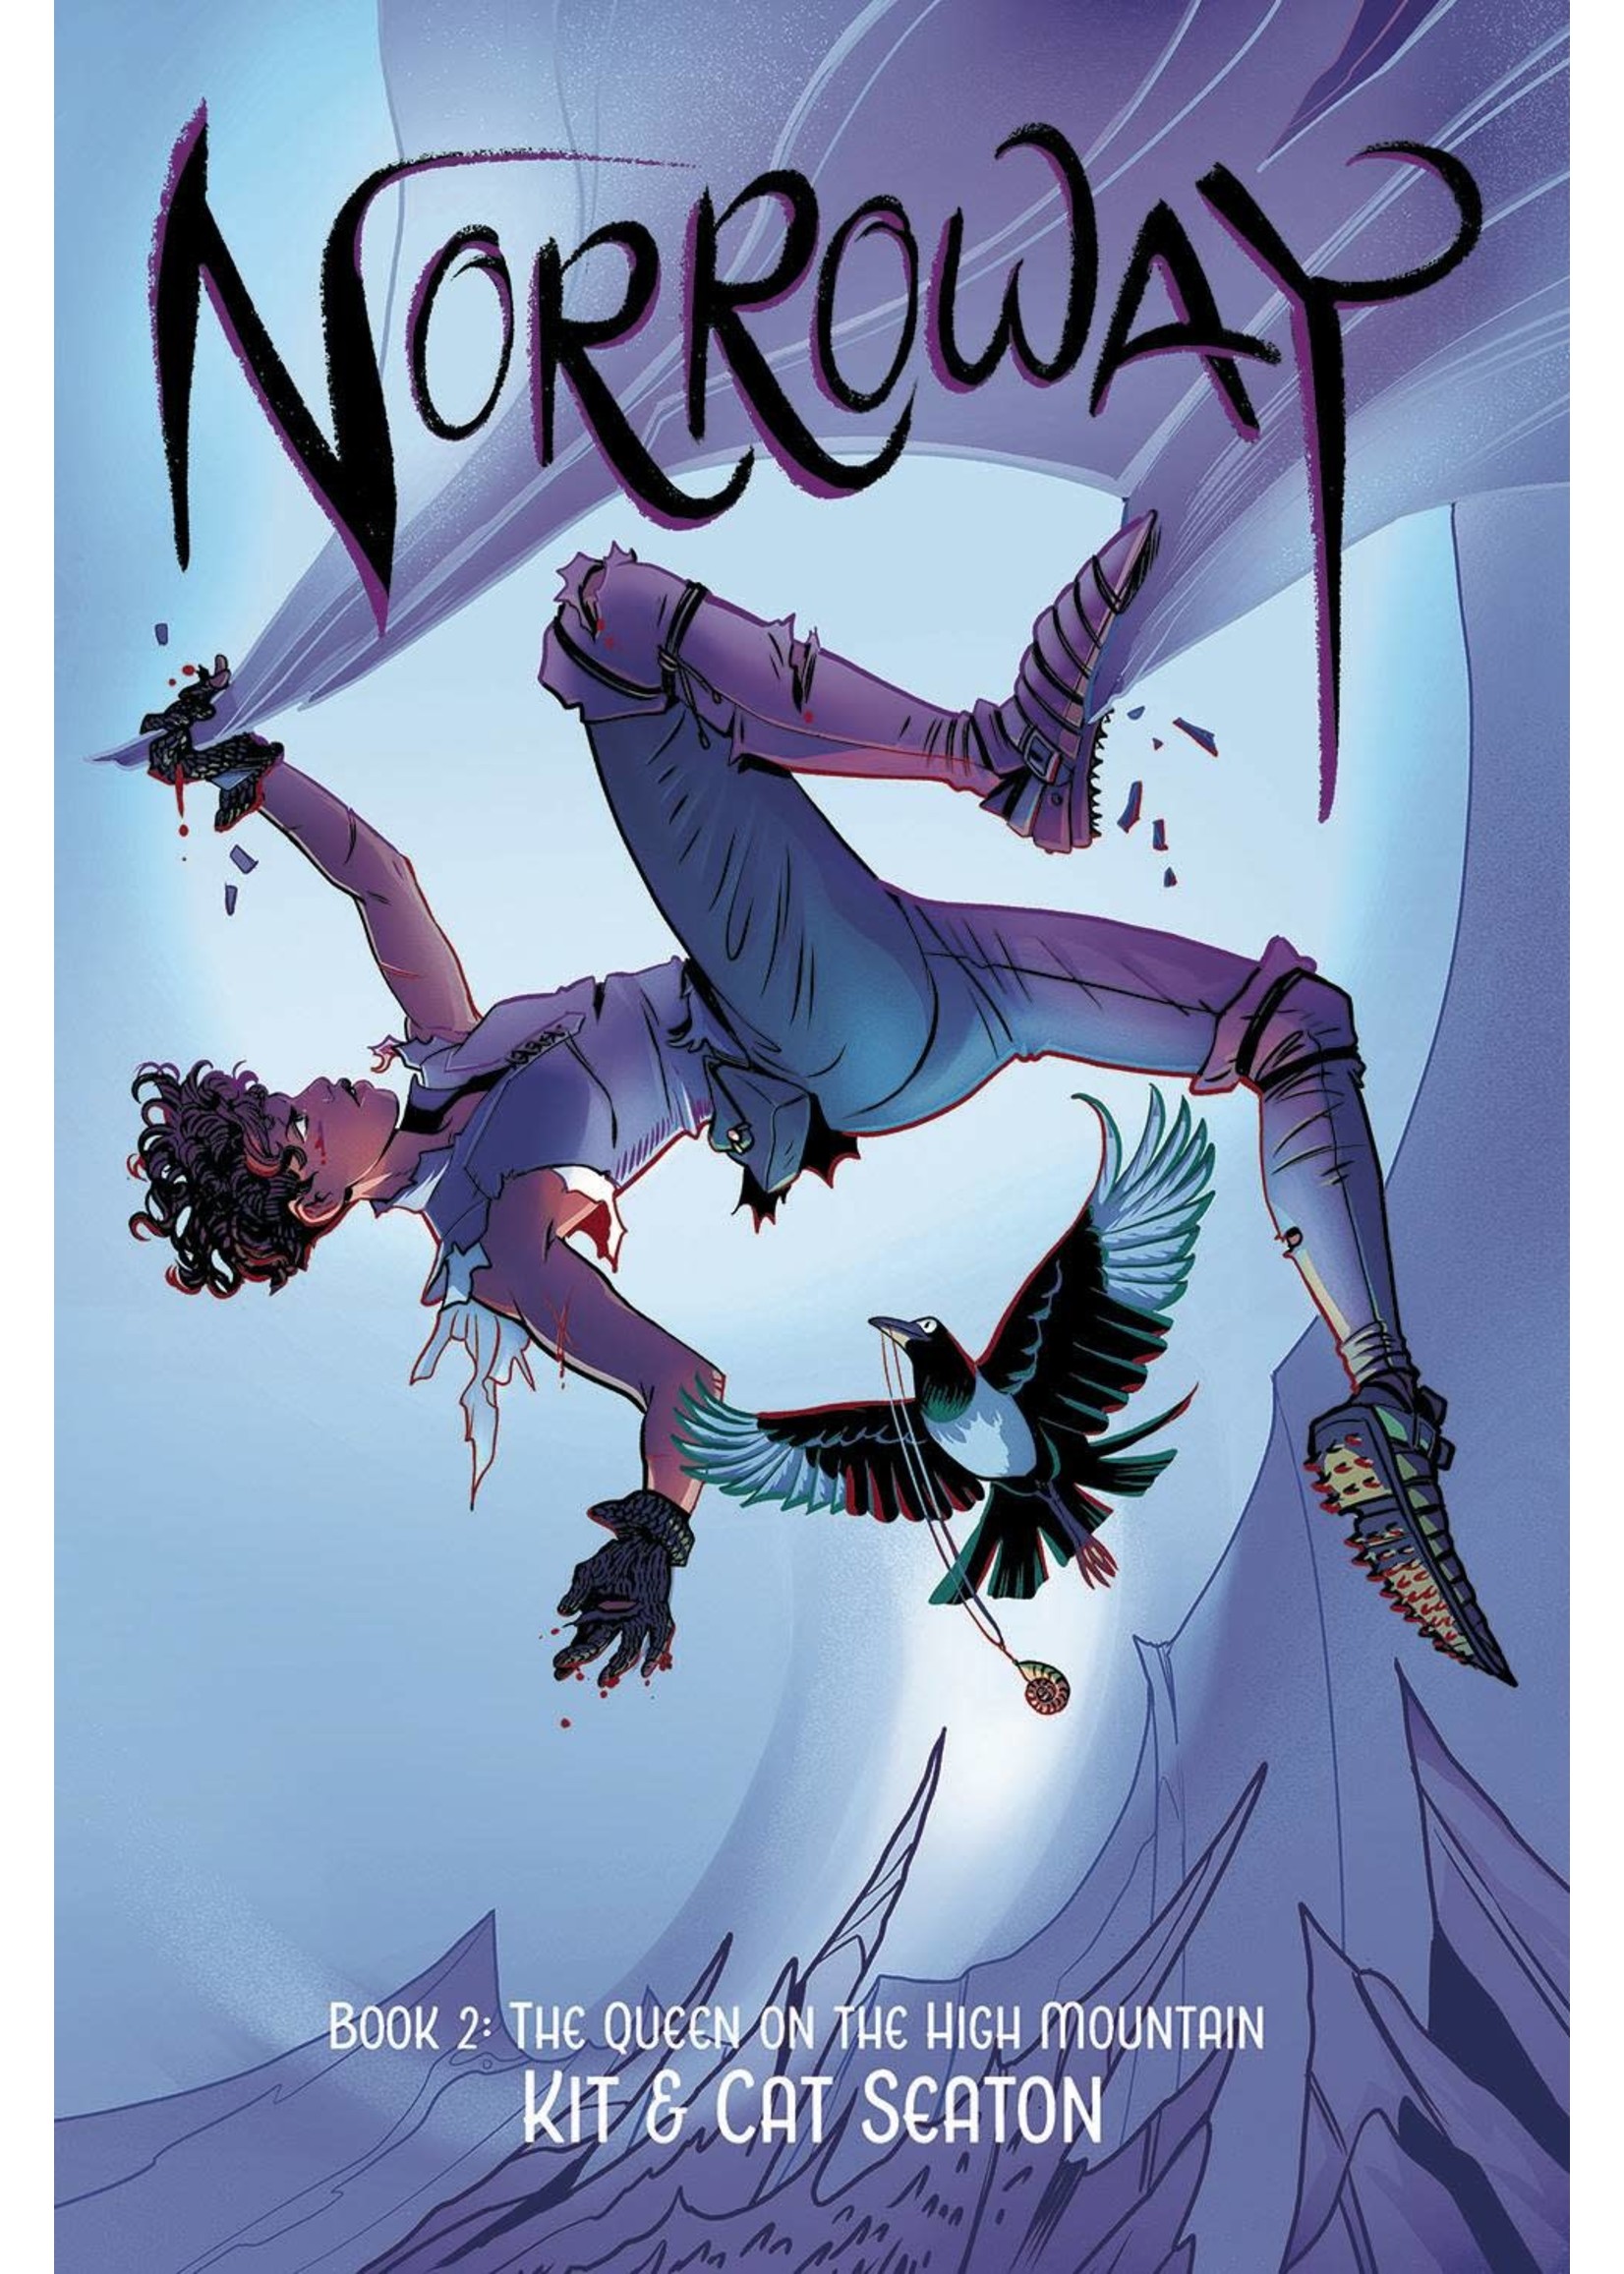 IMAGE COMICS NORROWAY TP BOOK 02 QUEEN ON HIGH MOUNTAIN